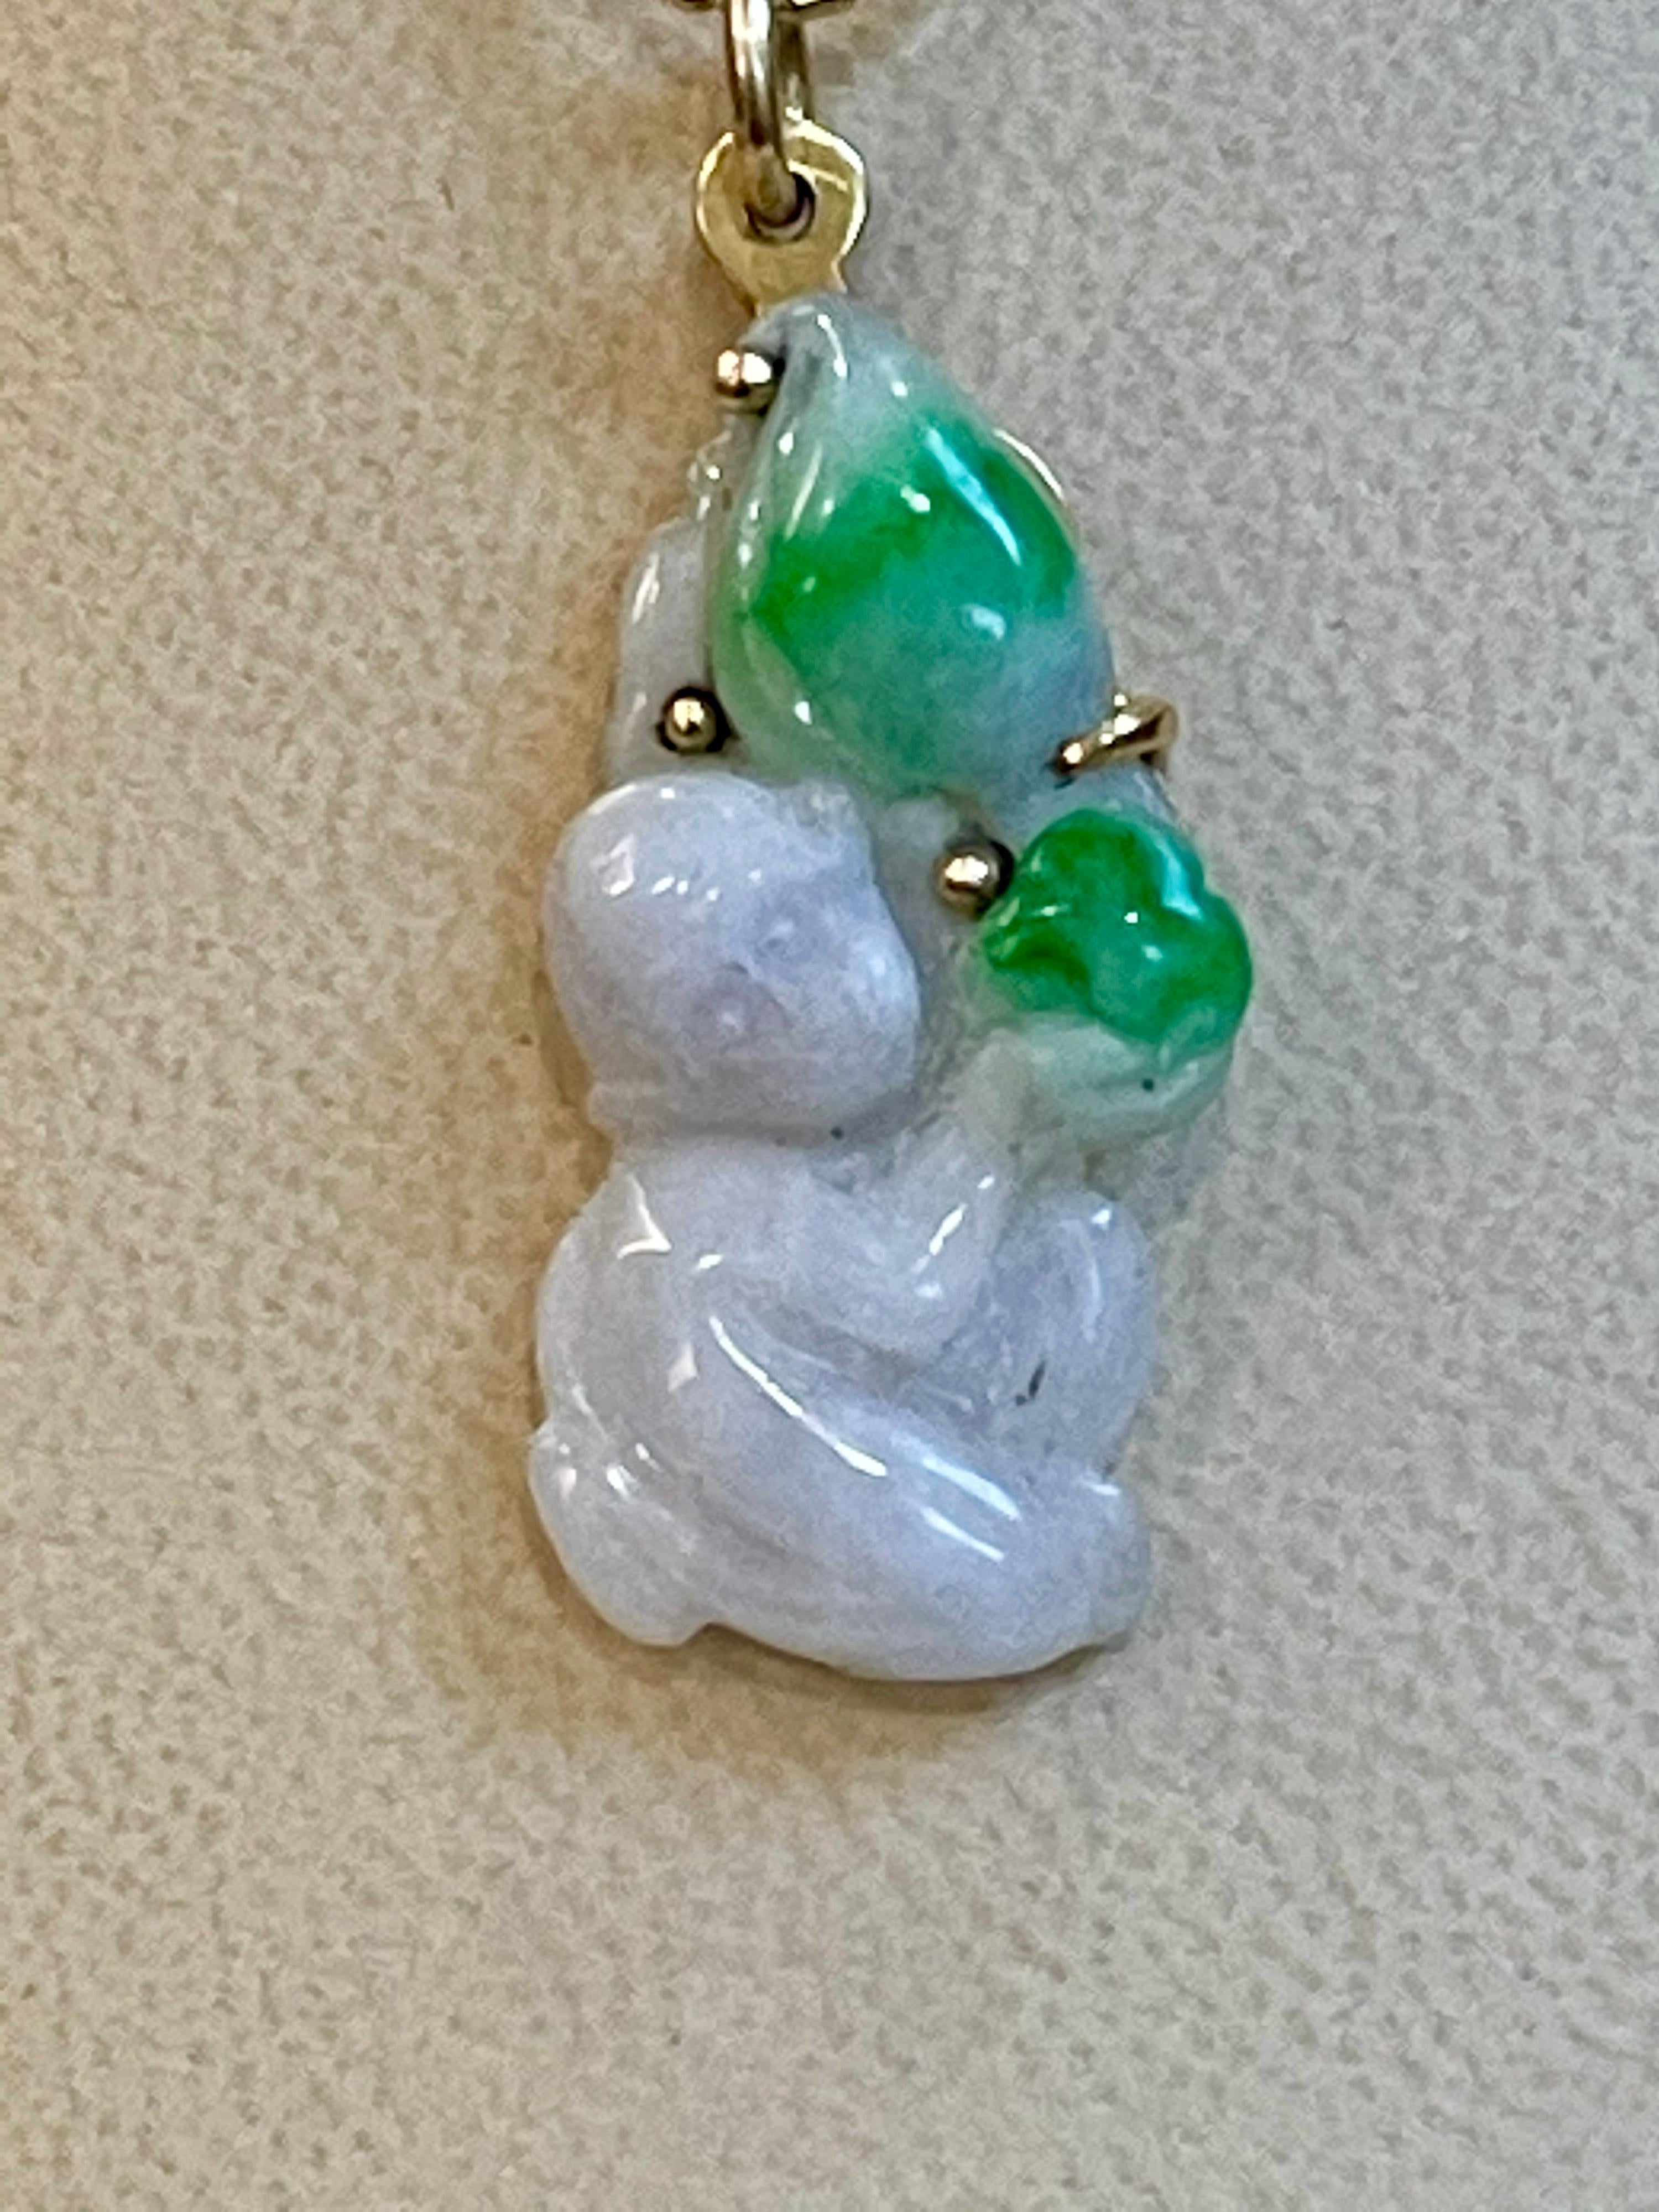 Monkey Face Natural Jade Pendant  Chain Necklace  14 Karat Yellow Gold  Vintage
This spectacular Pendant Necklace  consisting of a single stone of jade , a small monkey  in white and green Jade.
18 Karat   gold  5.4 Grams with Jade
The pendant comes